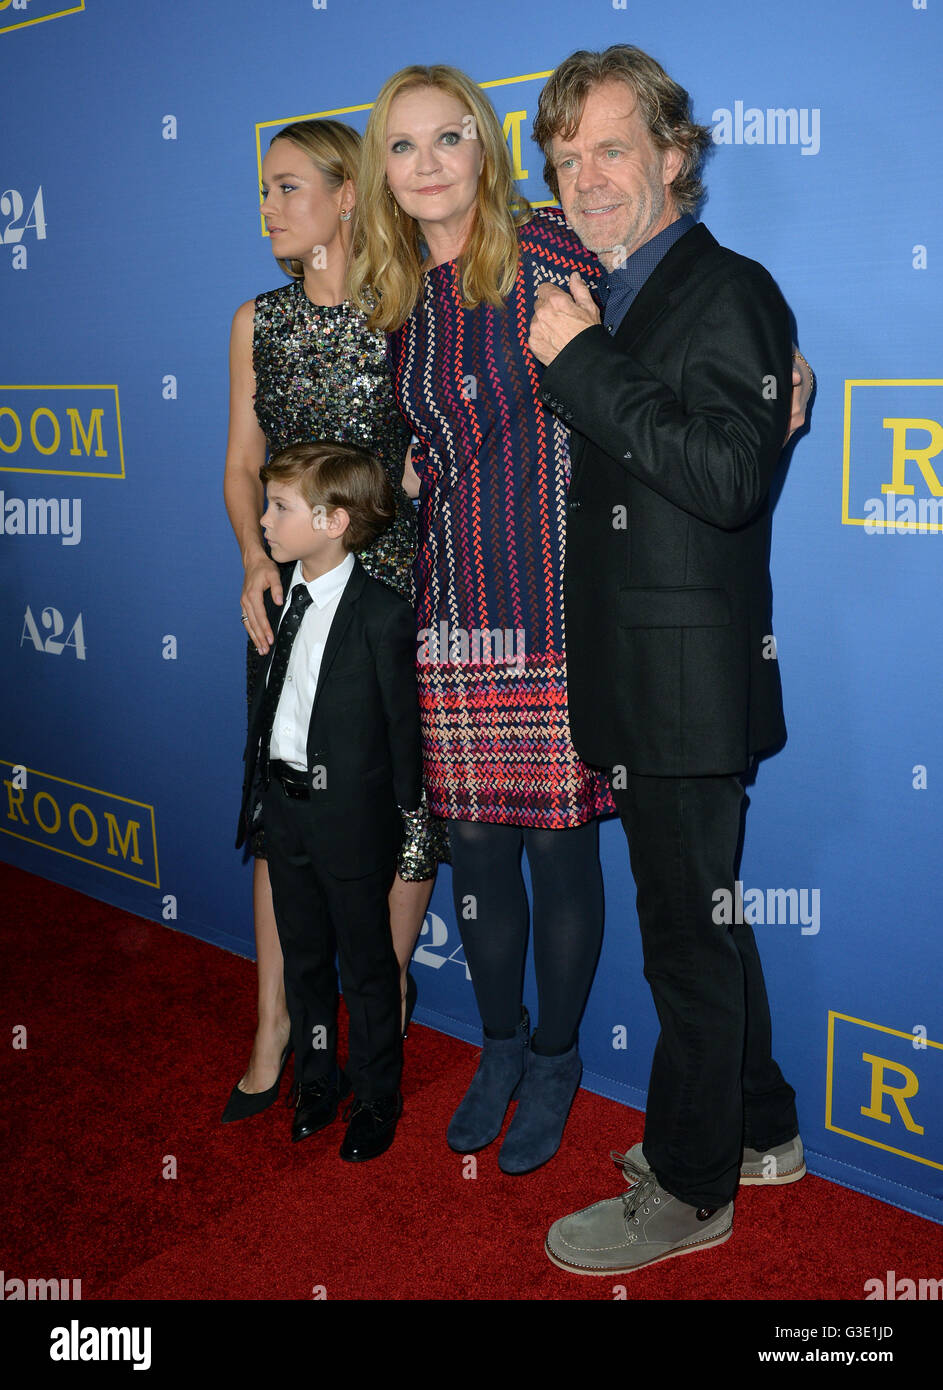 LOS ANGELES, CA - OCTOBER 13, 2015: William H. Macy, Brie Larson, Joan Allen & Jacob Tremblay at the Los Angeles premiere of their movie 'Room' at the Pacific Design Centre, West Hollywood. Stock Photo